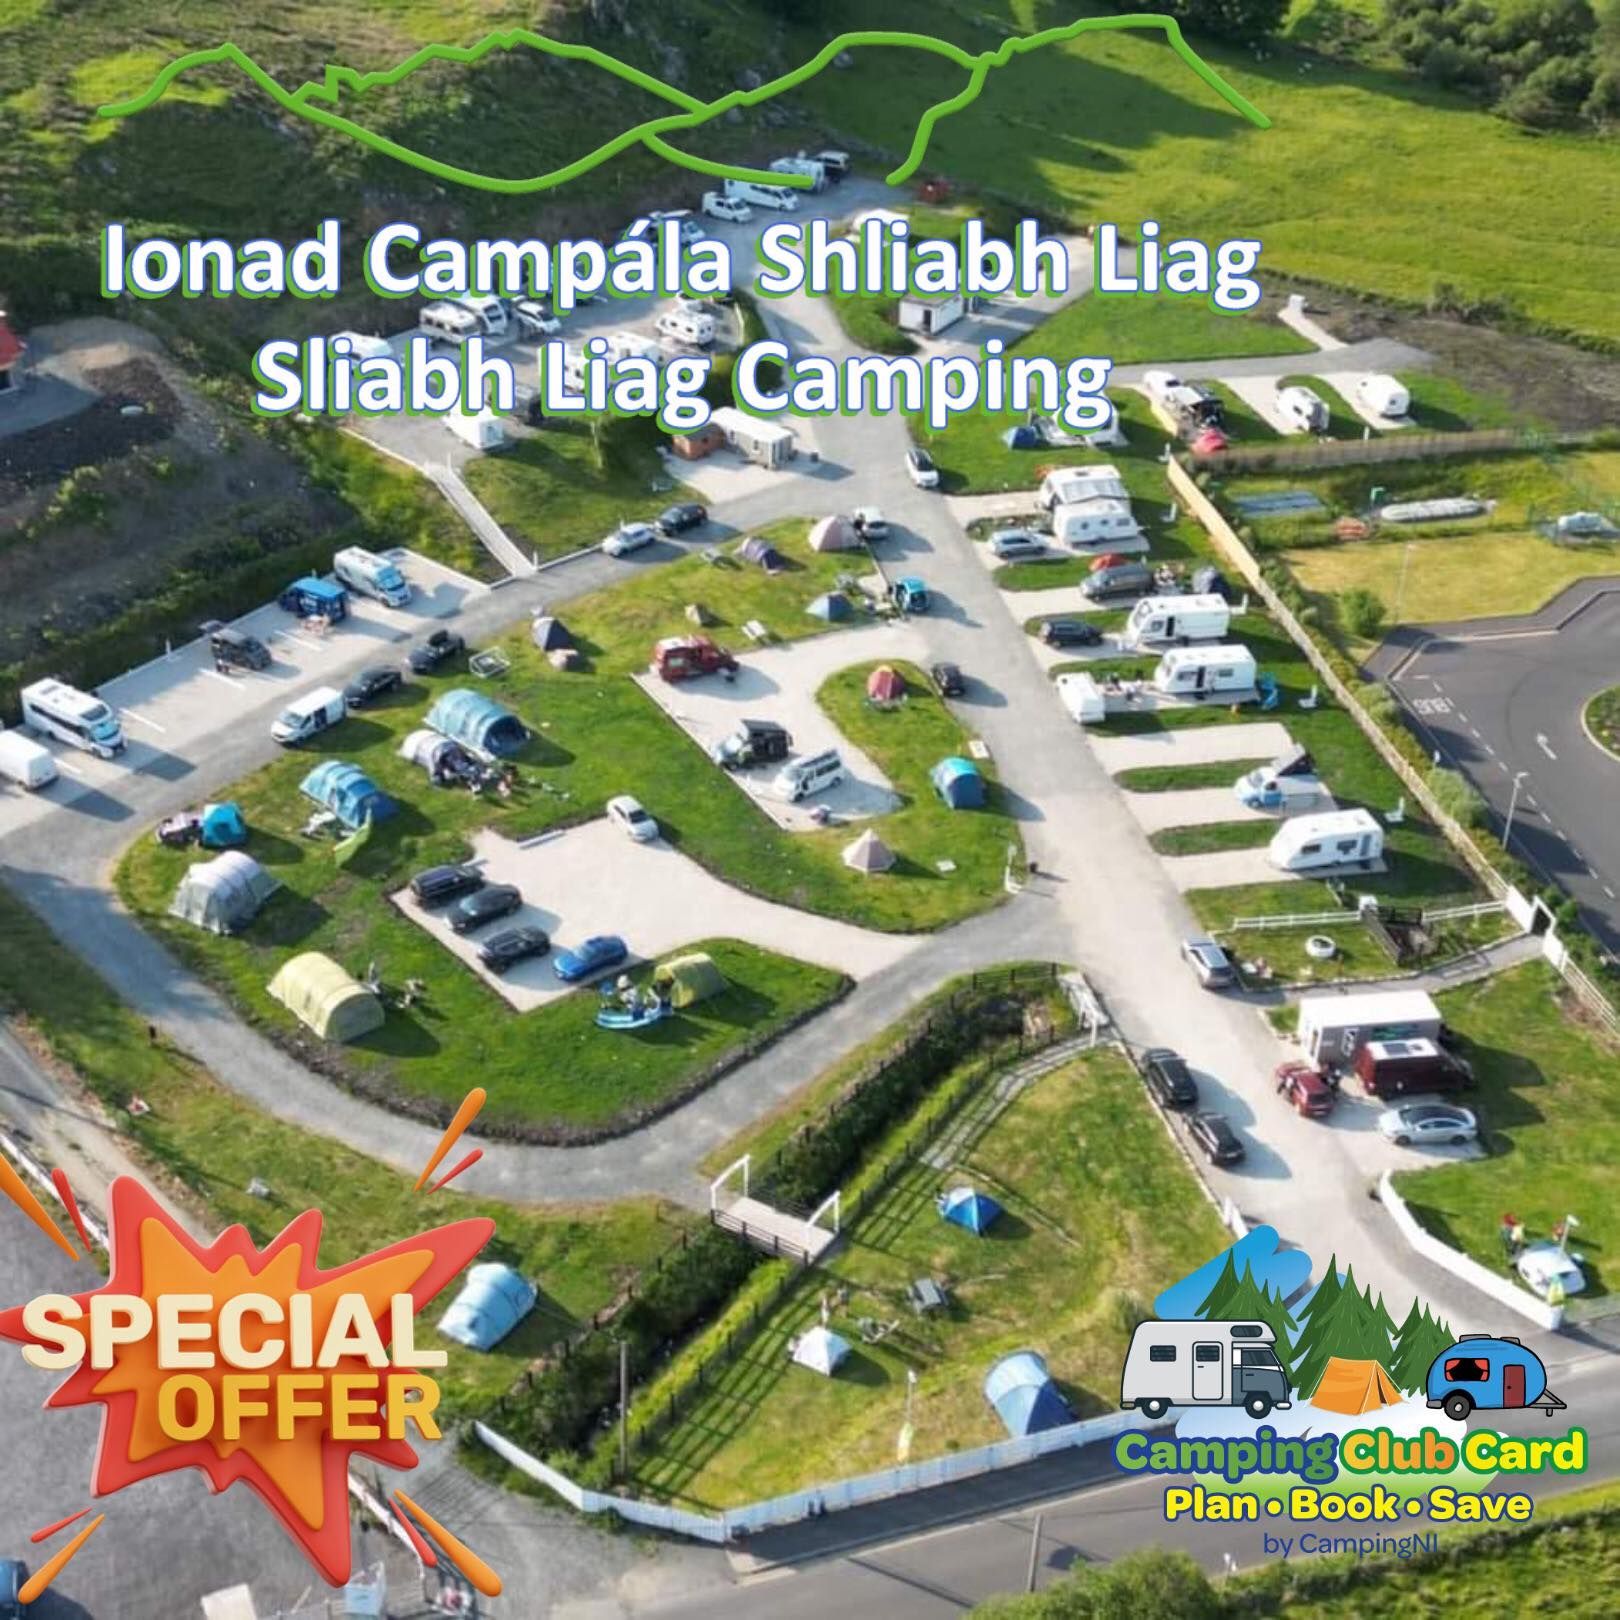 Special offer on shower tokens at Sliabh Liag Camping with club membership